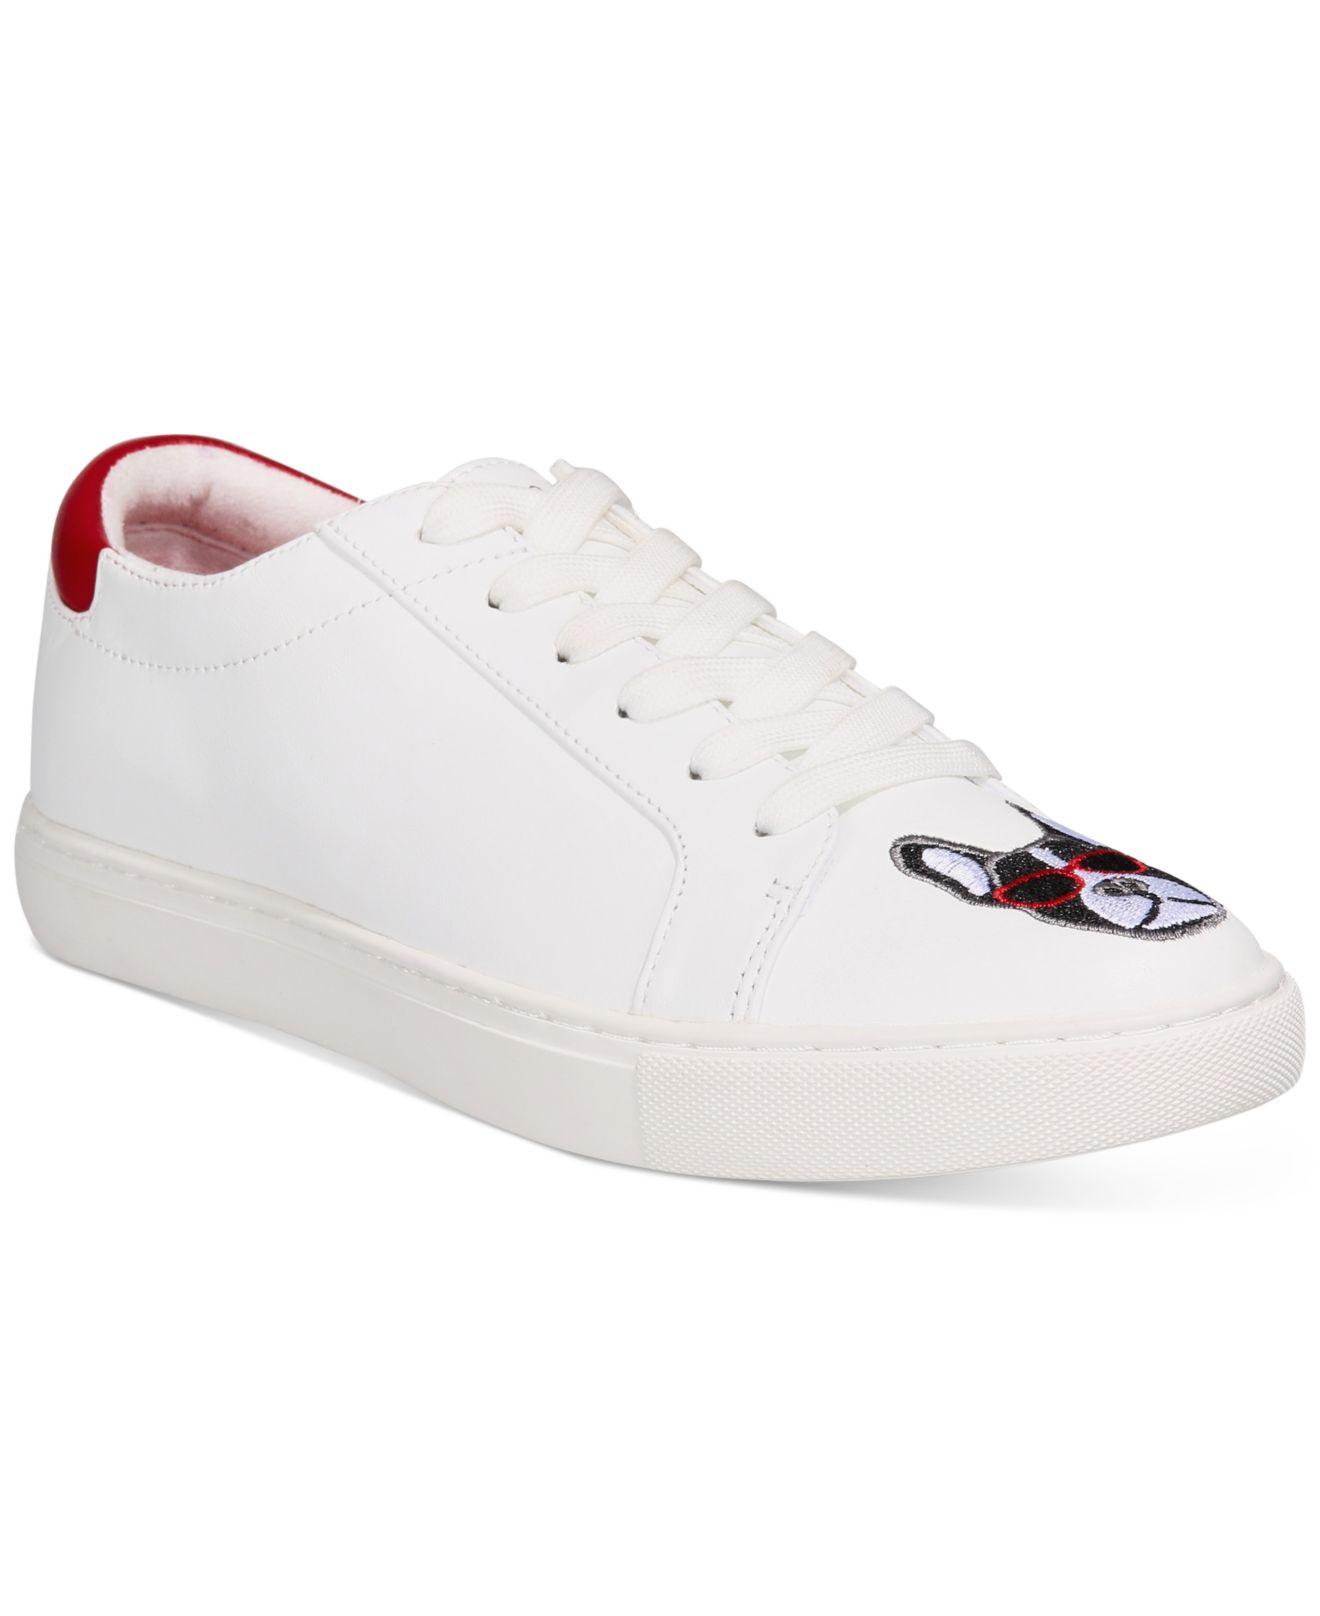 Tommy Hilfiger White Billy Cny 2a Trainers Hotsell, 56% OFF |  www.colegiogamarra.com